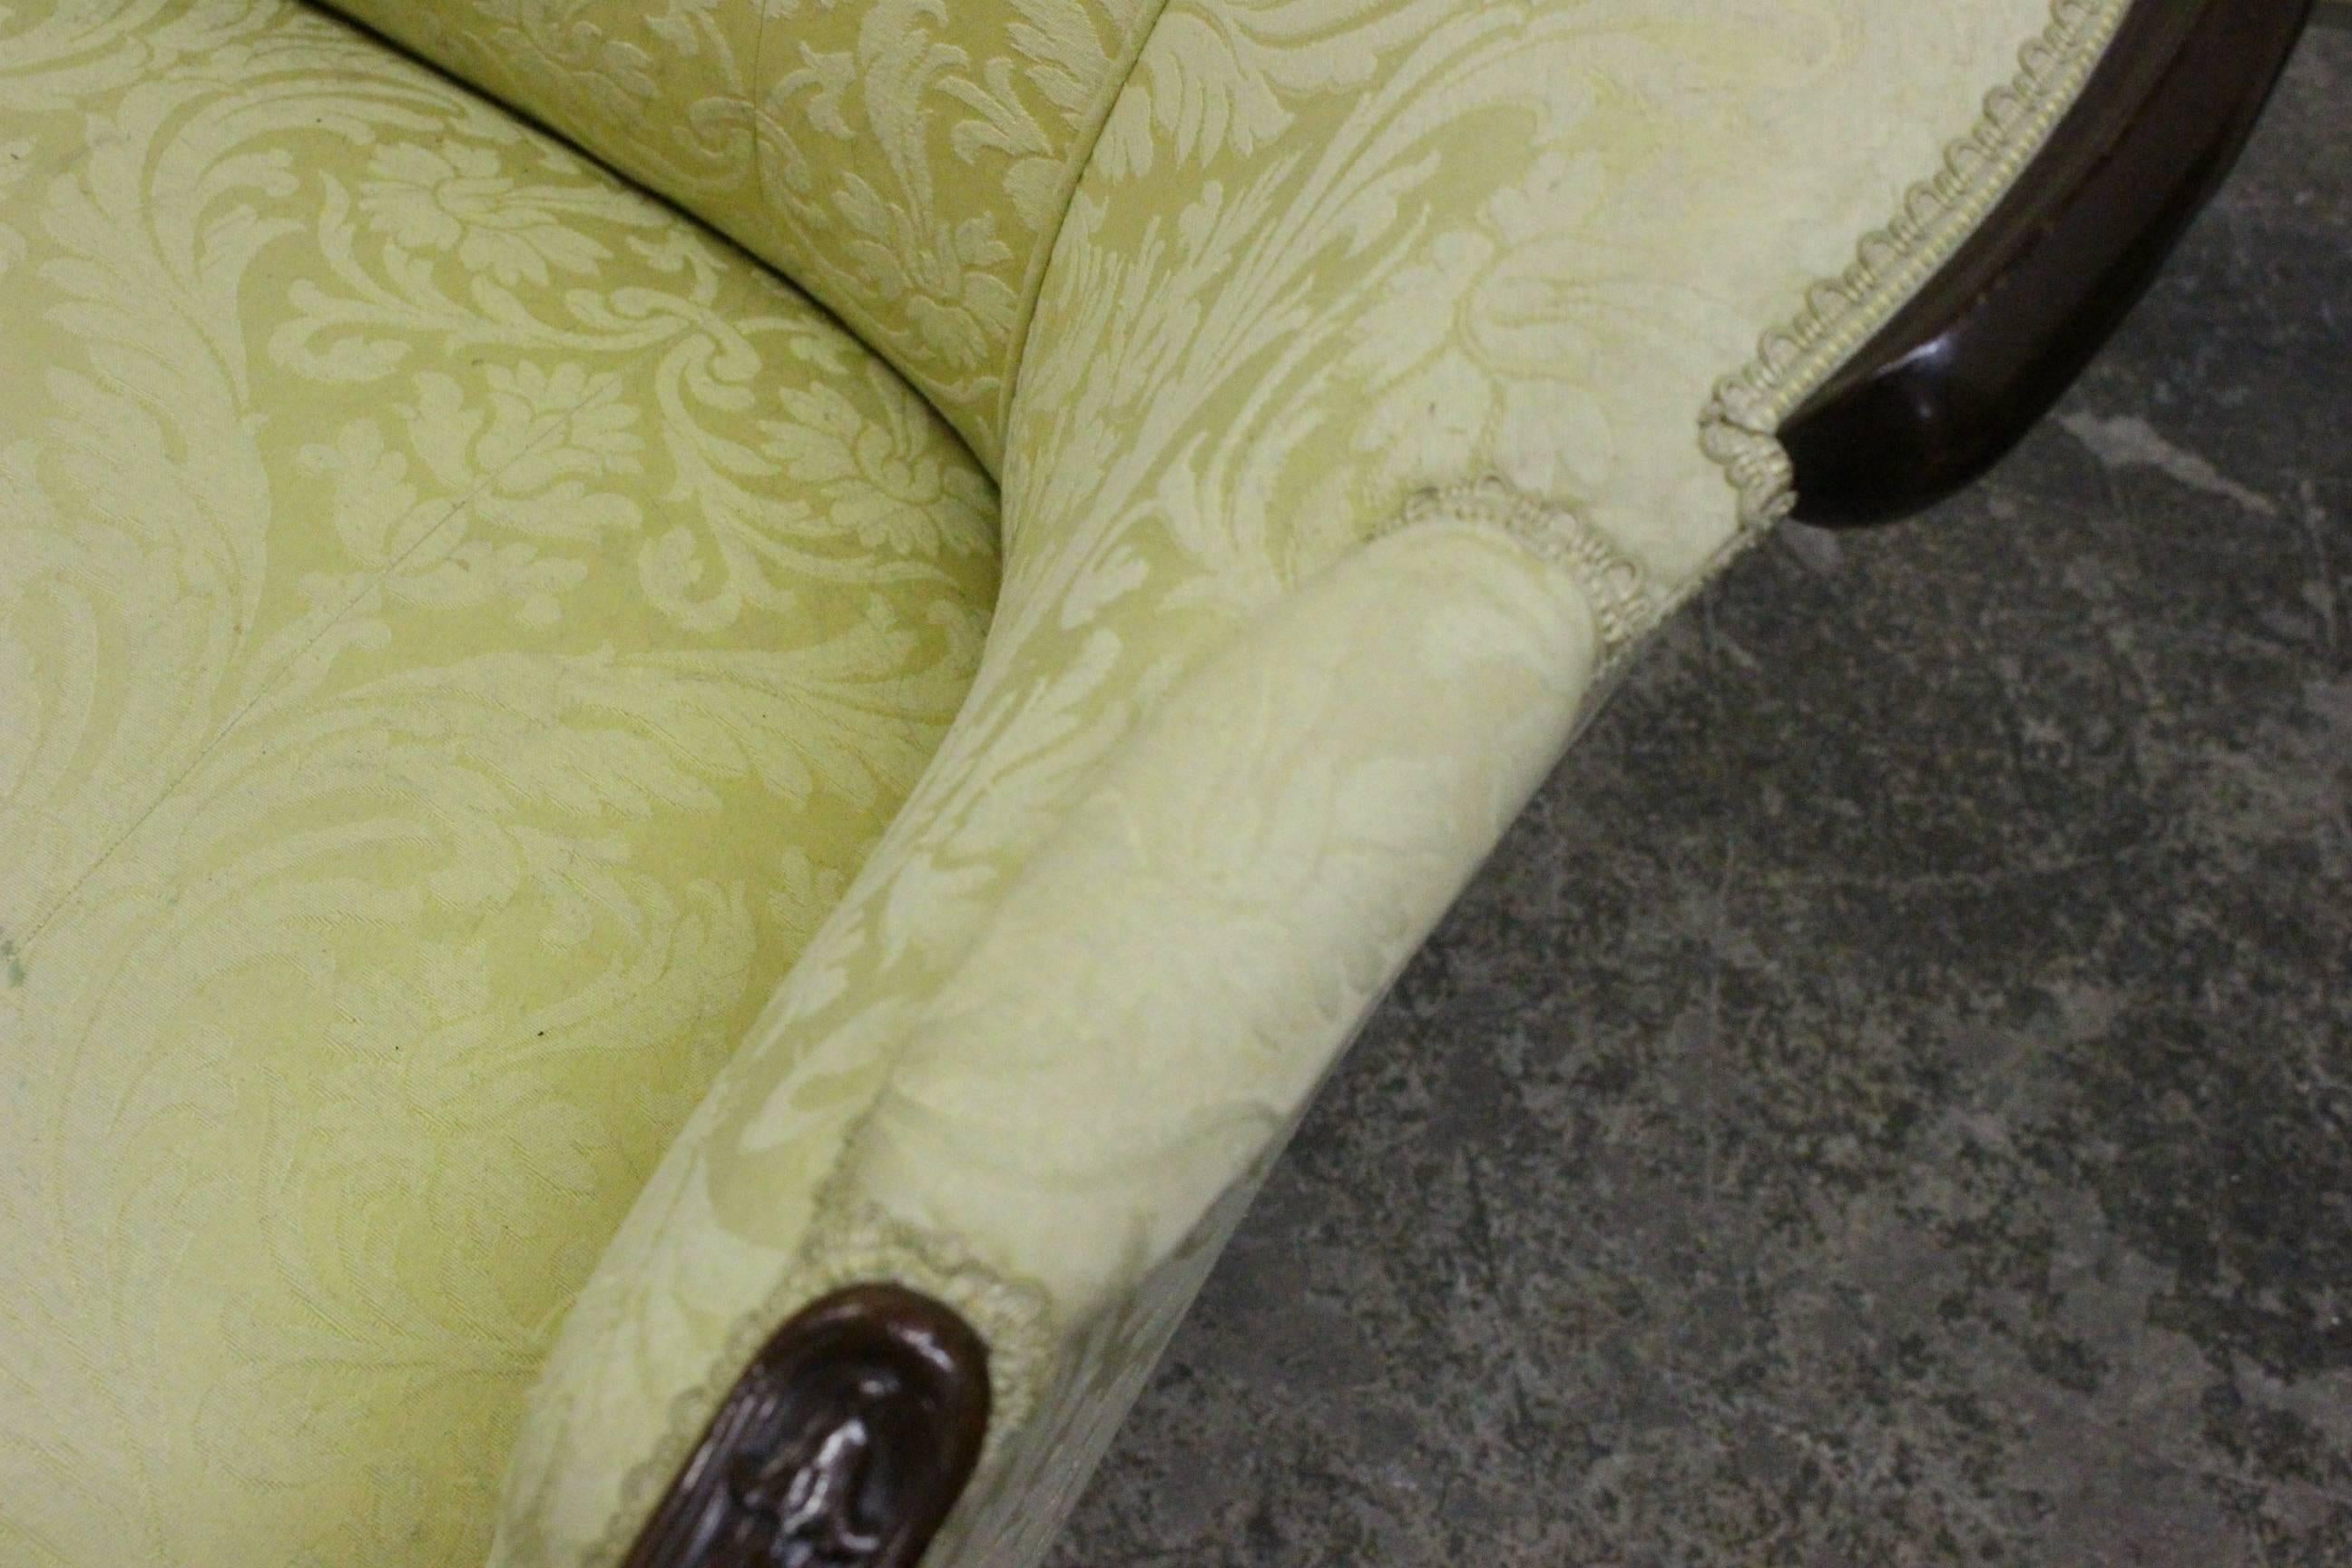 Wood wrapped French sofa upholstered in a yellow damask. 

Dimensions: 77